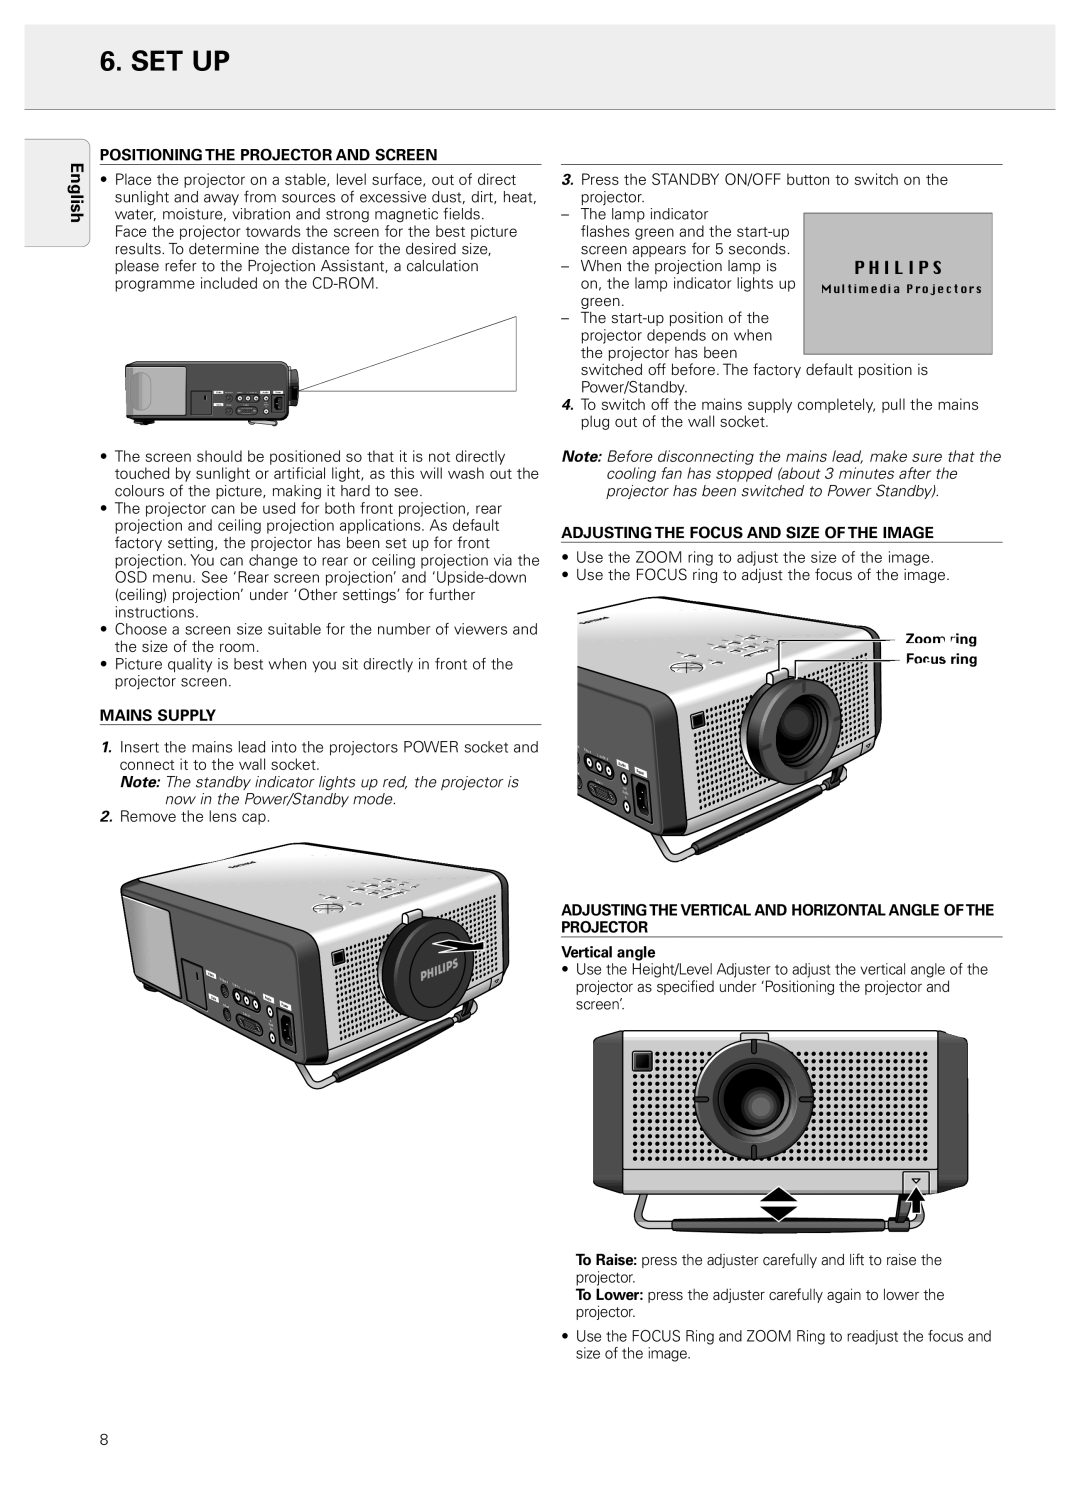 Philips LC4043 manual Set Up, Positioning The Projector And Screen, Mains Supply, Adjusting The Focus And Size Of The Image 